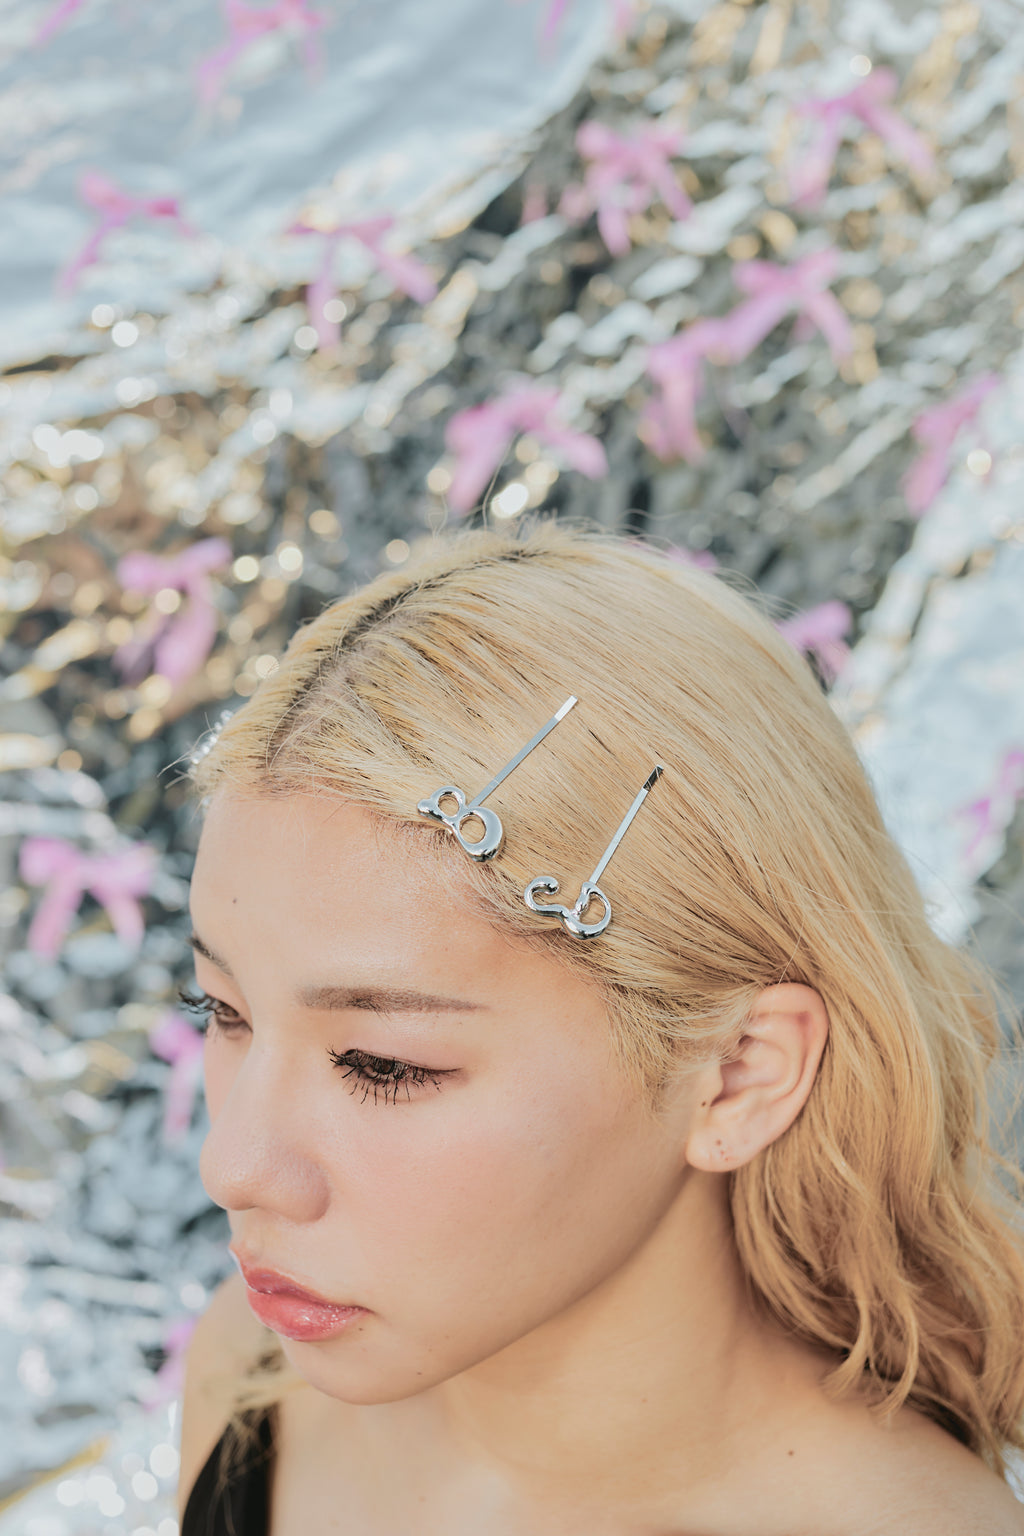 LOGO HAIRPIN – FRONT ROW by UUUM